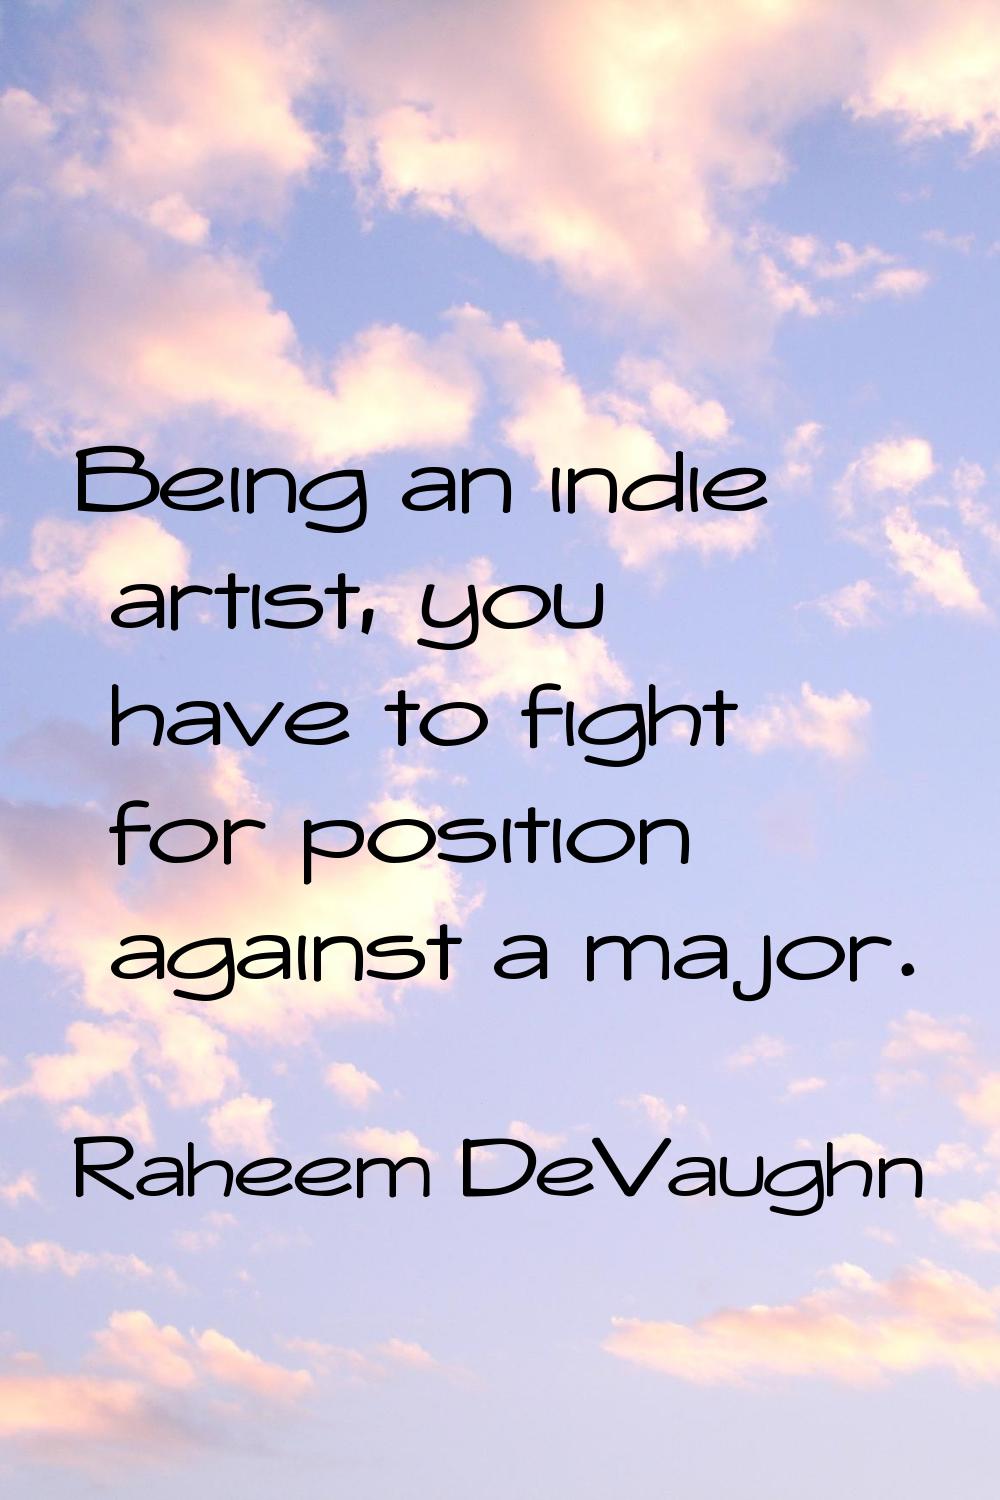 Being an indie artist, you have to fight for position against a major.